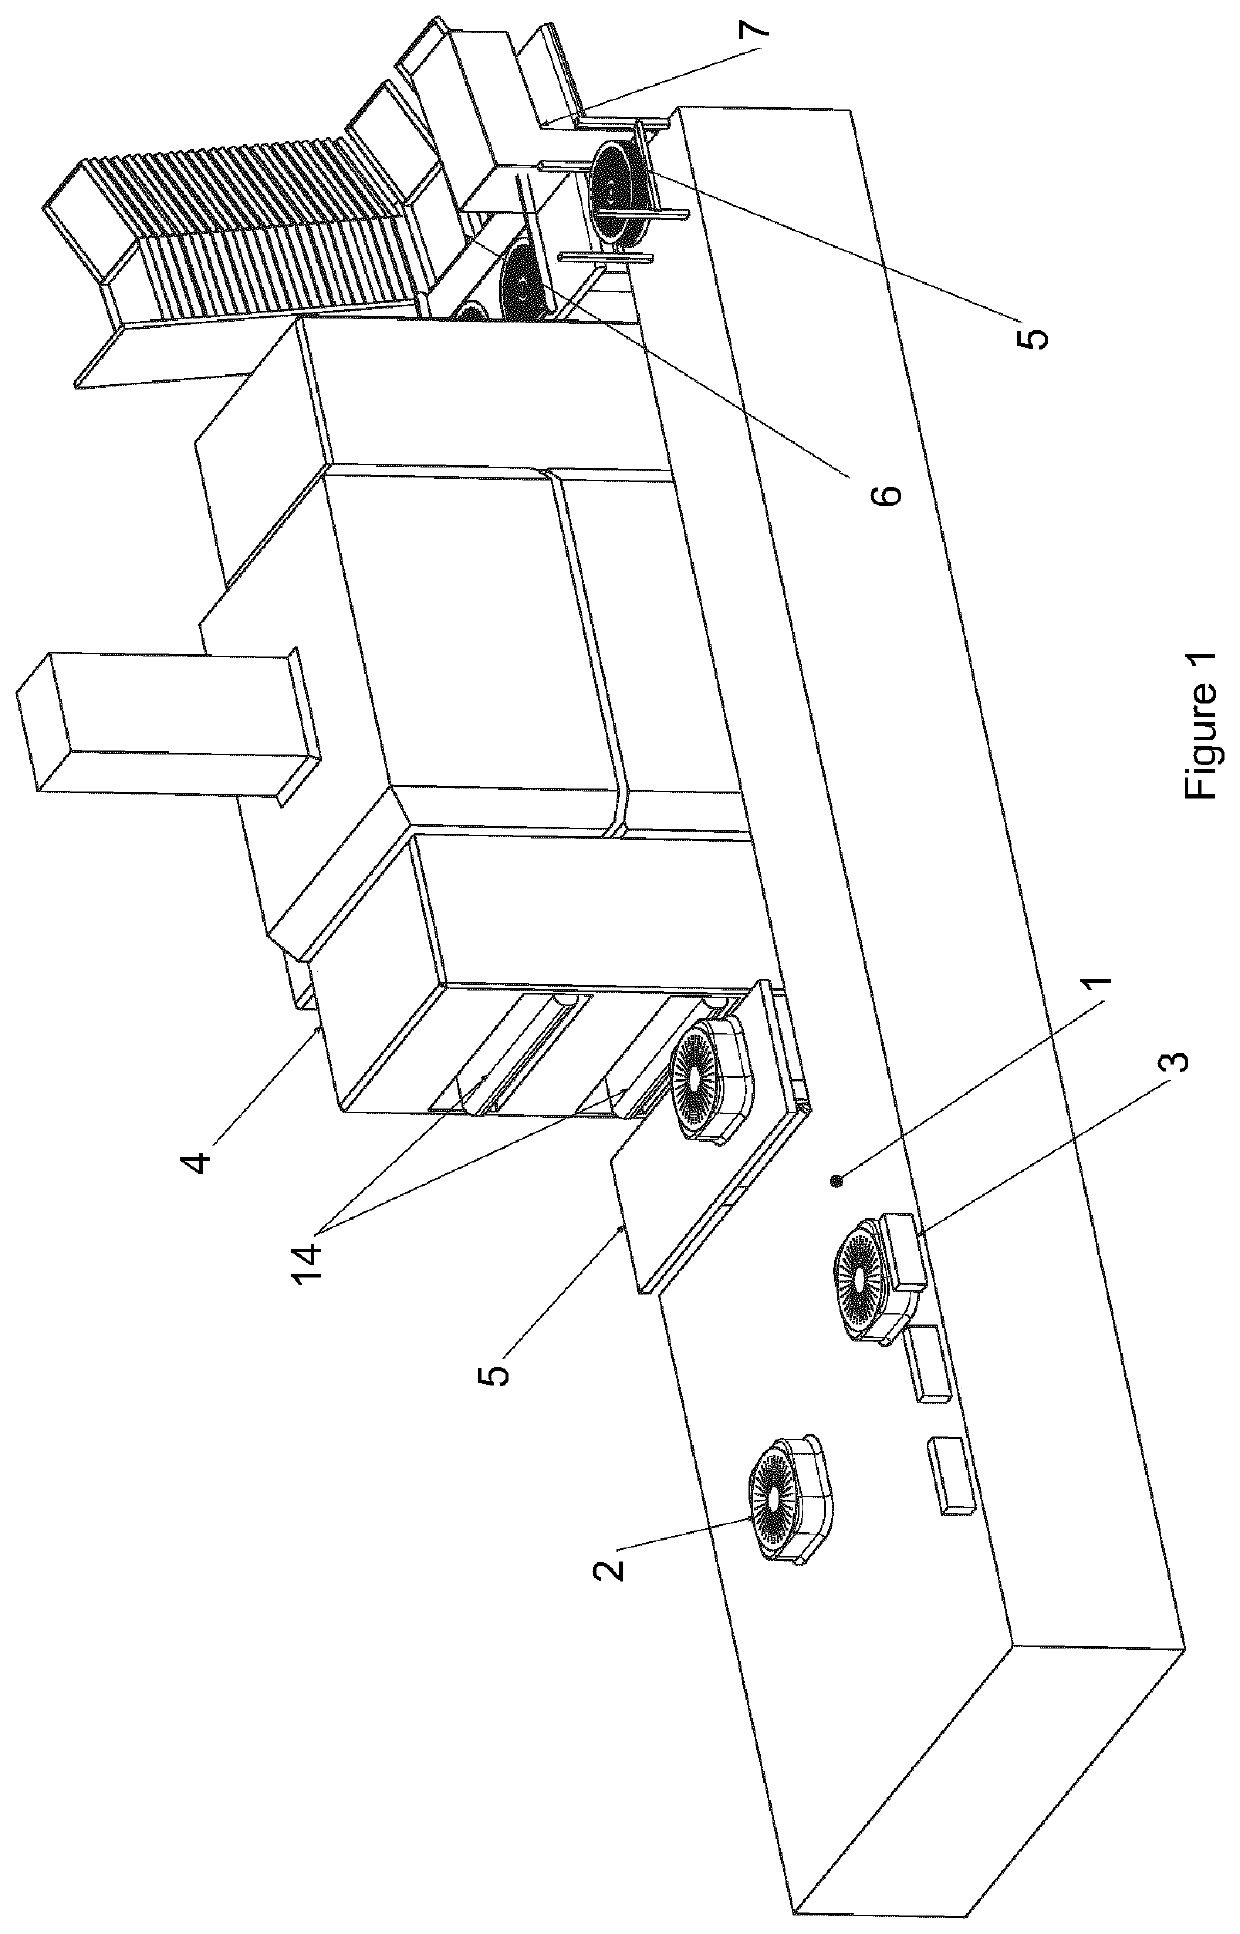 Flexible automatic food processing and client orders execution machine